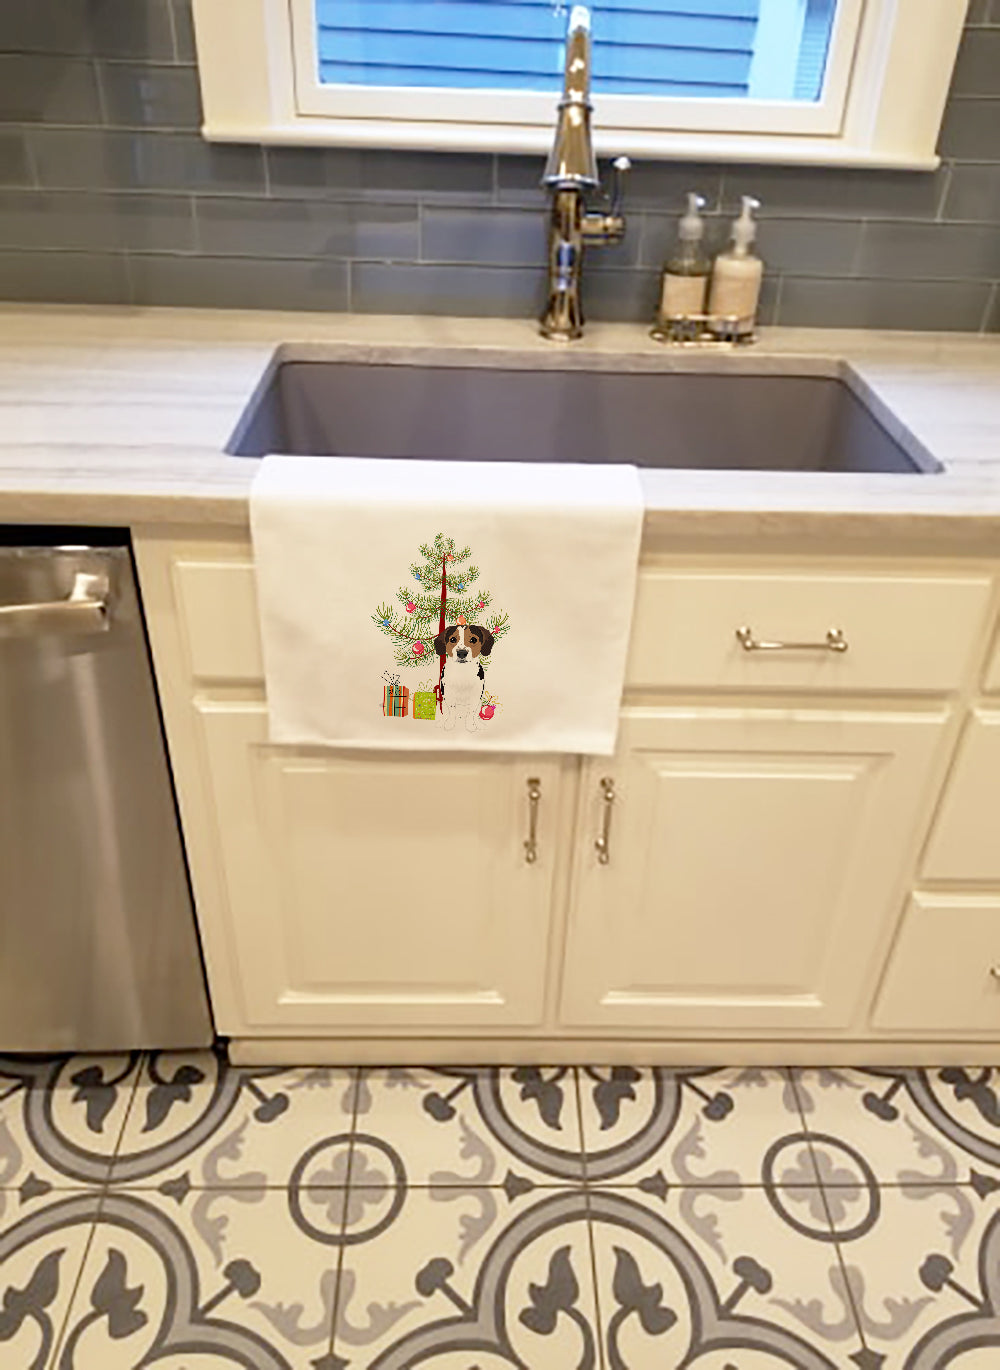 Buy this Beagle Tricolor Ticked Christmas White Kitchen Towel Set of 2